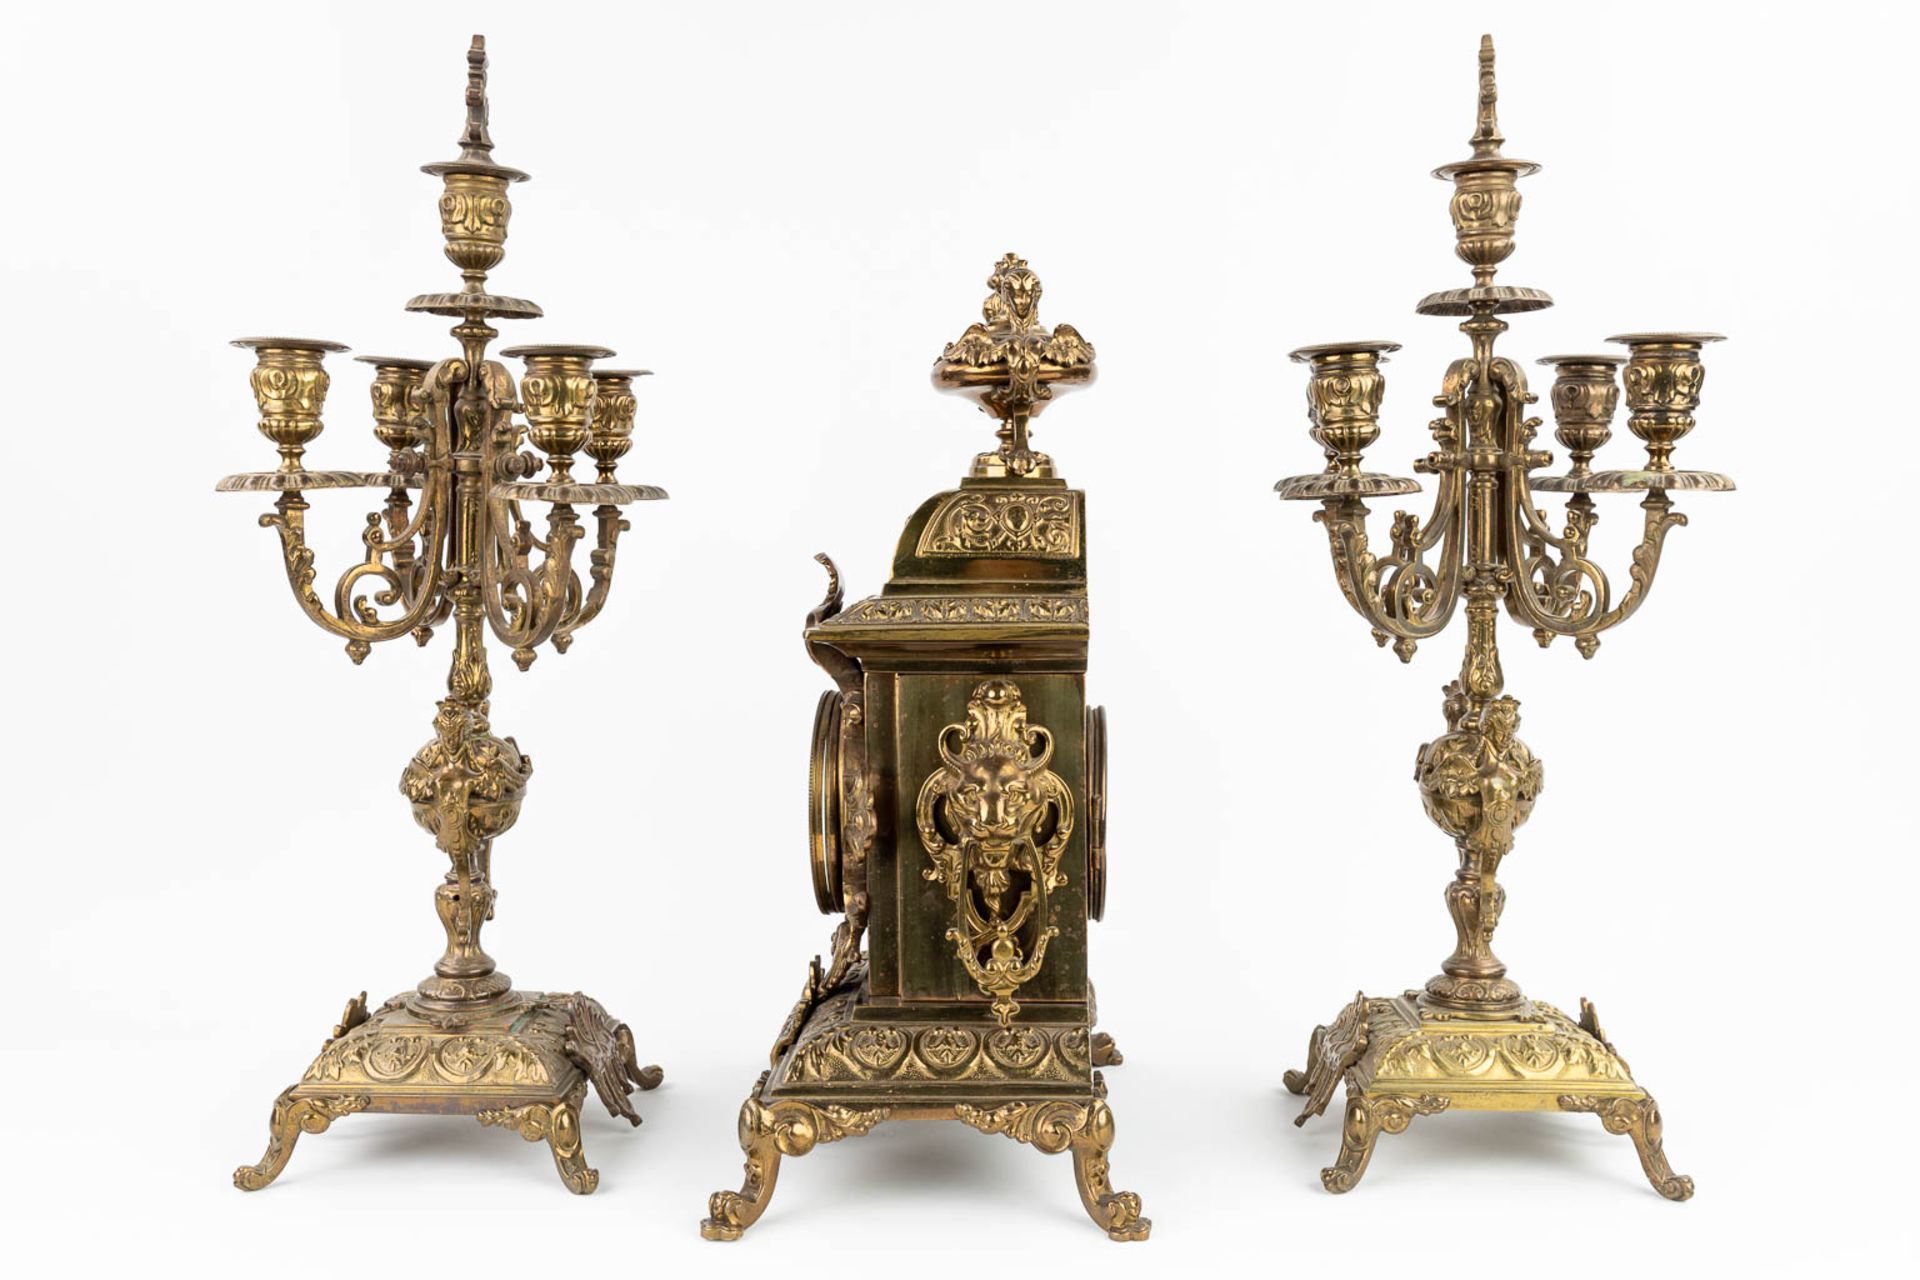 A three-piece mantle garniture clock and candelabra, made of bronze. (20 x 29 x 45cm) - Image 14 of 17